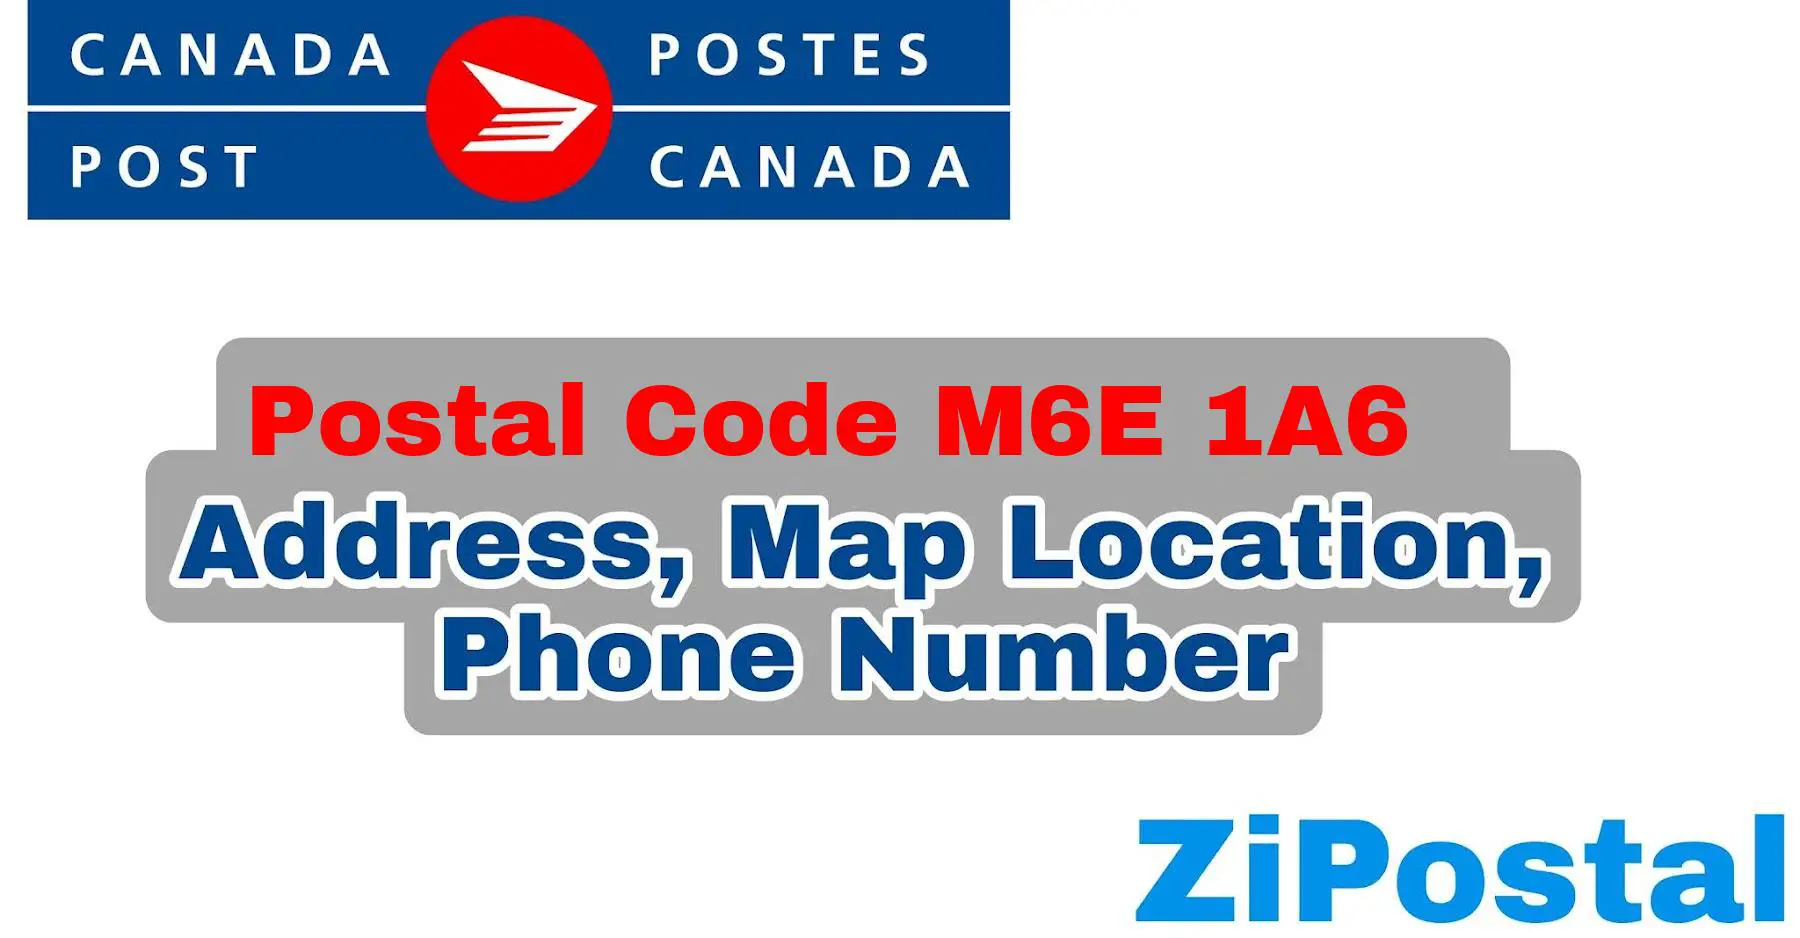 Postal Code M6E 1A6 Address Map Location and Phone Number